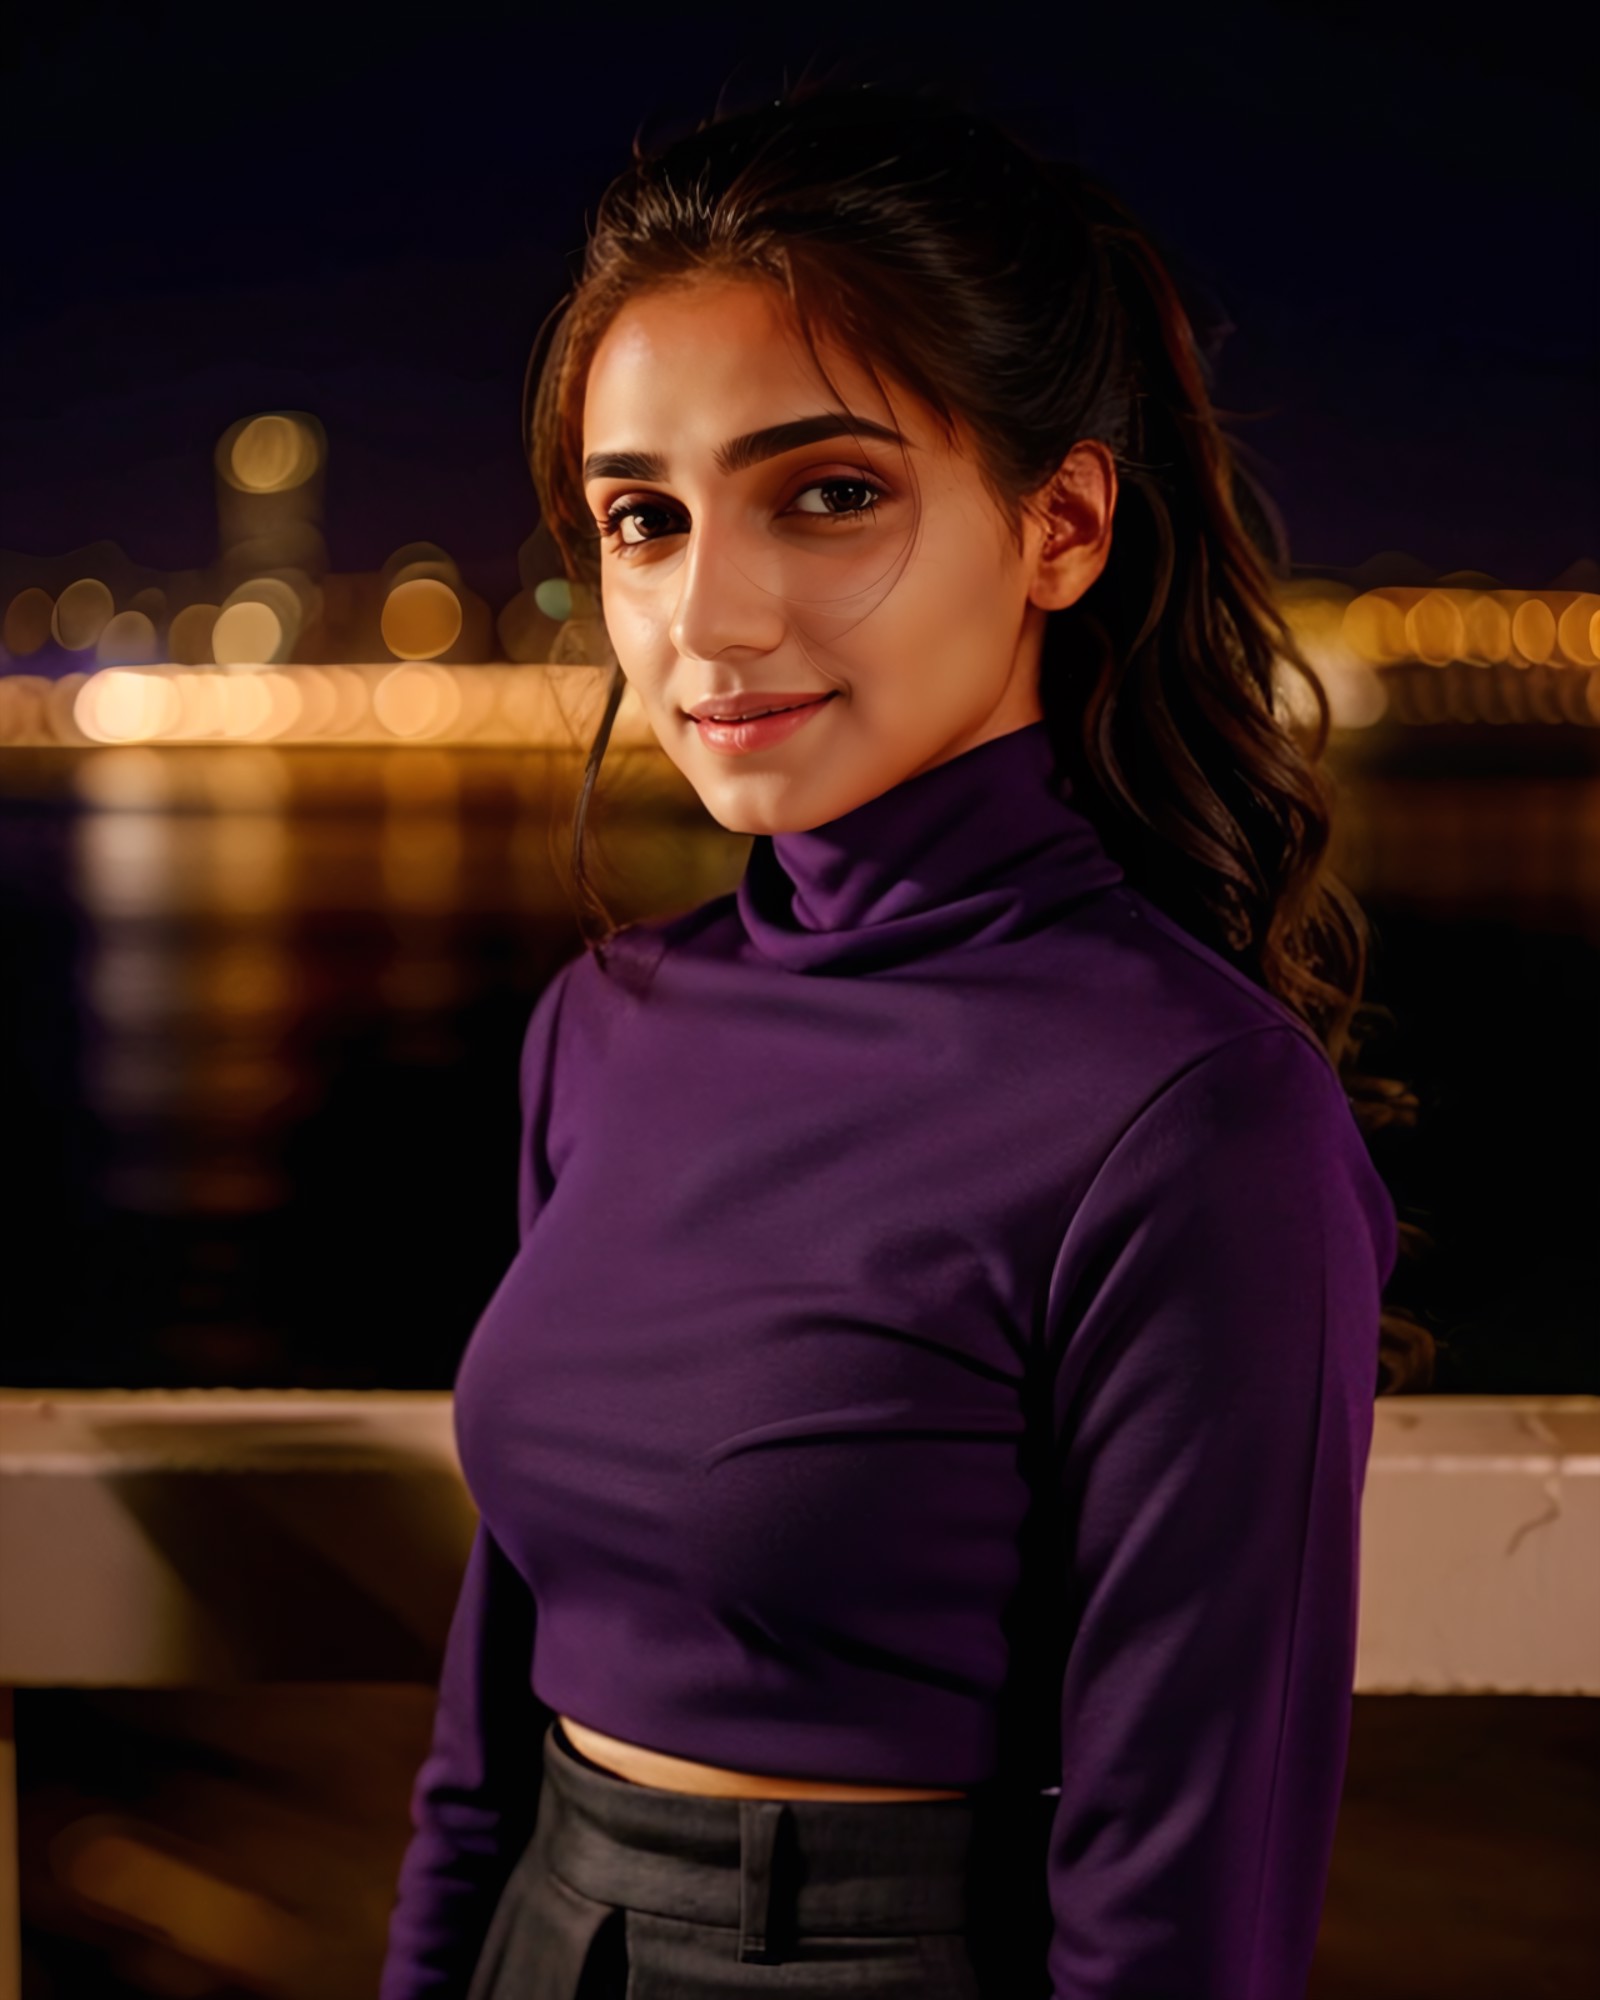 portrait photo of a vdka woman, wearing high-neck Purple clothing, solo, smiling, night time, city lights  in background b...